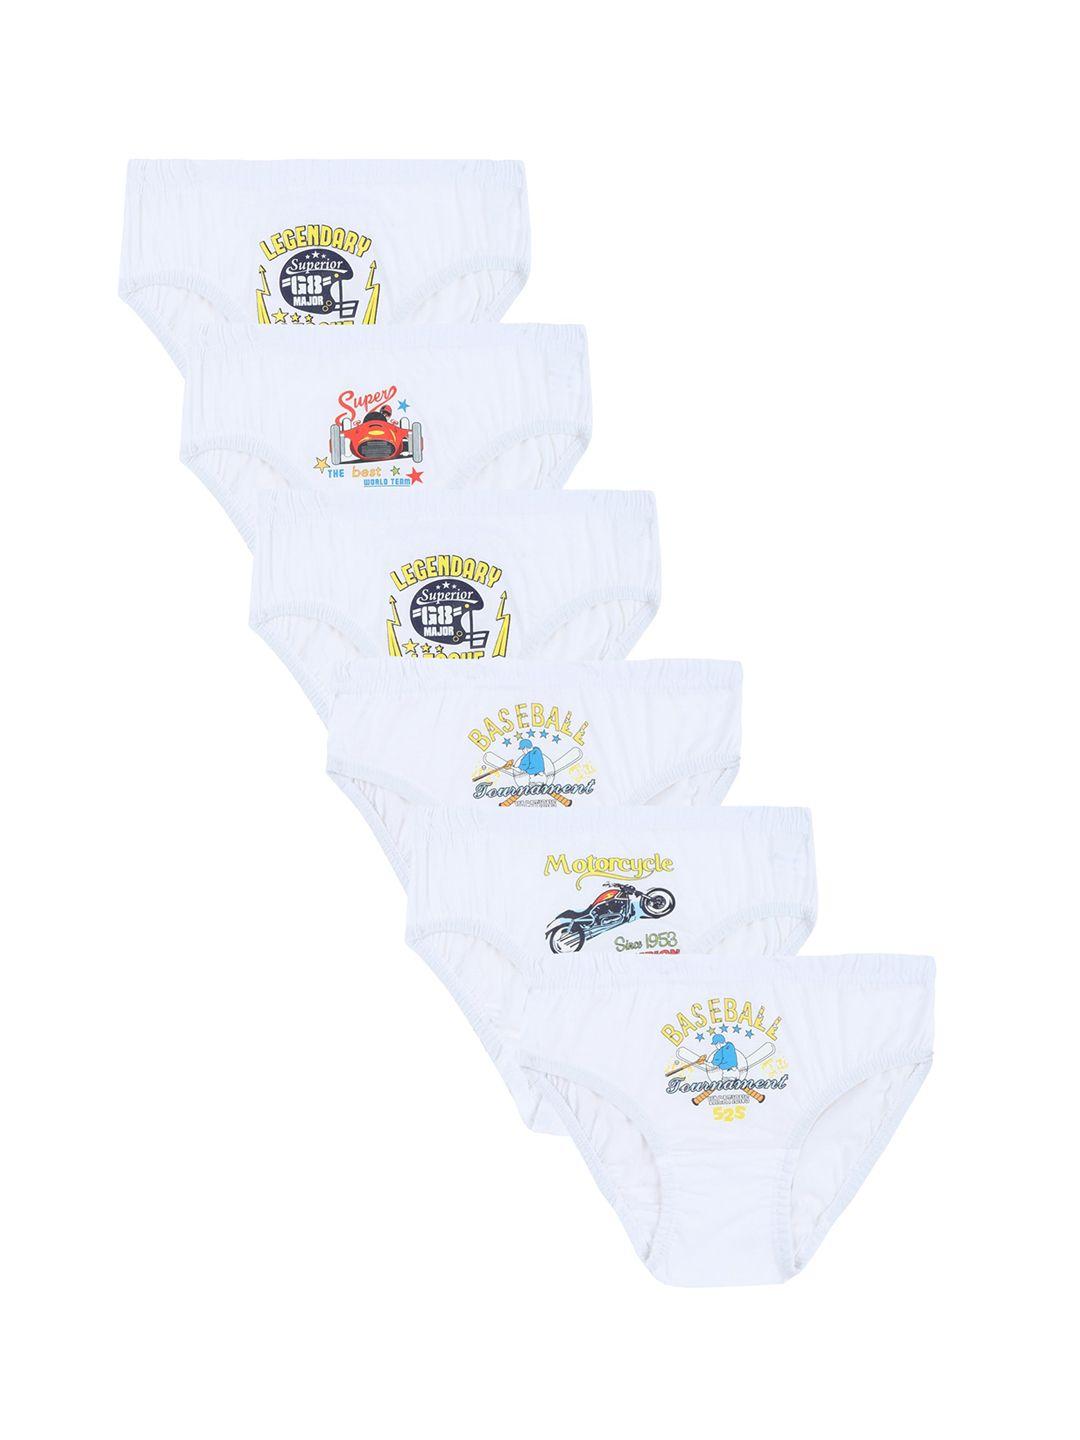 dyca-boys--pack-of-6-assorted-printed-cotton-briefs